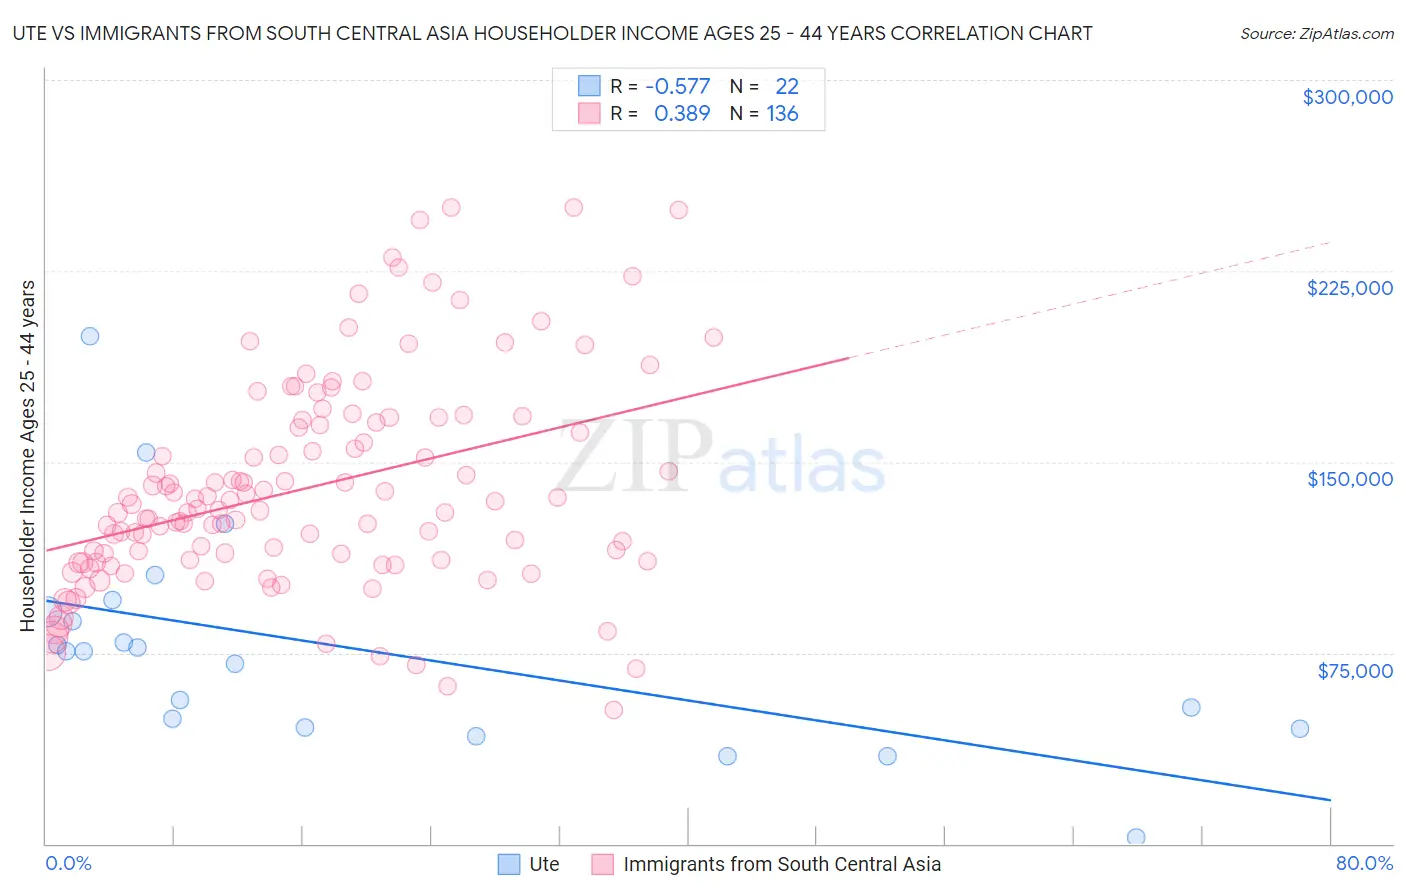 Ute vs Immigrants from South Central Asia Householder Income Ages 25 - 44 years